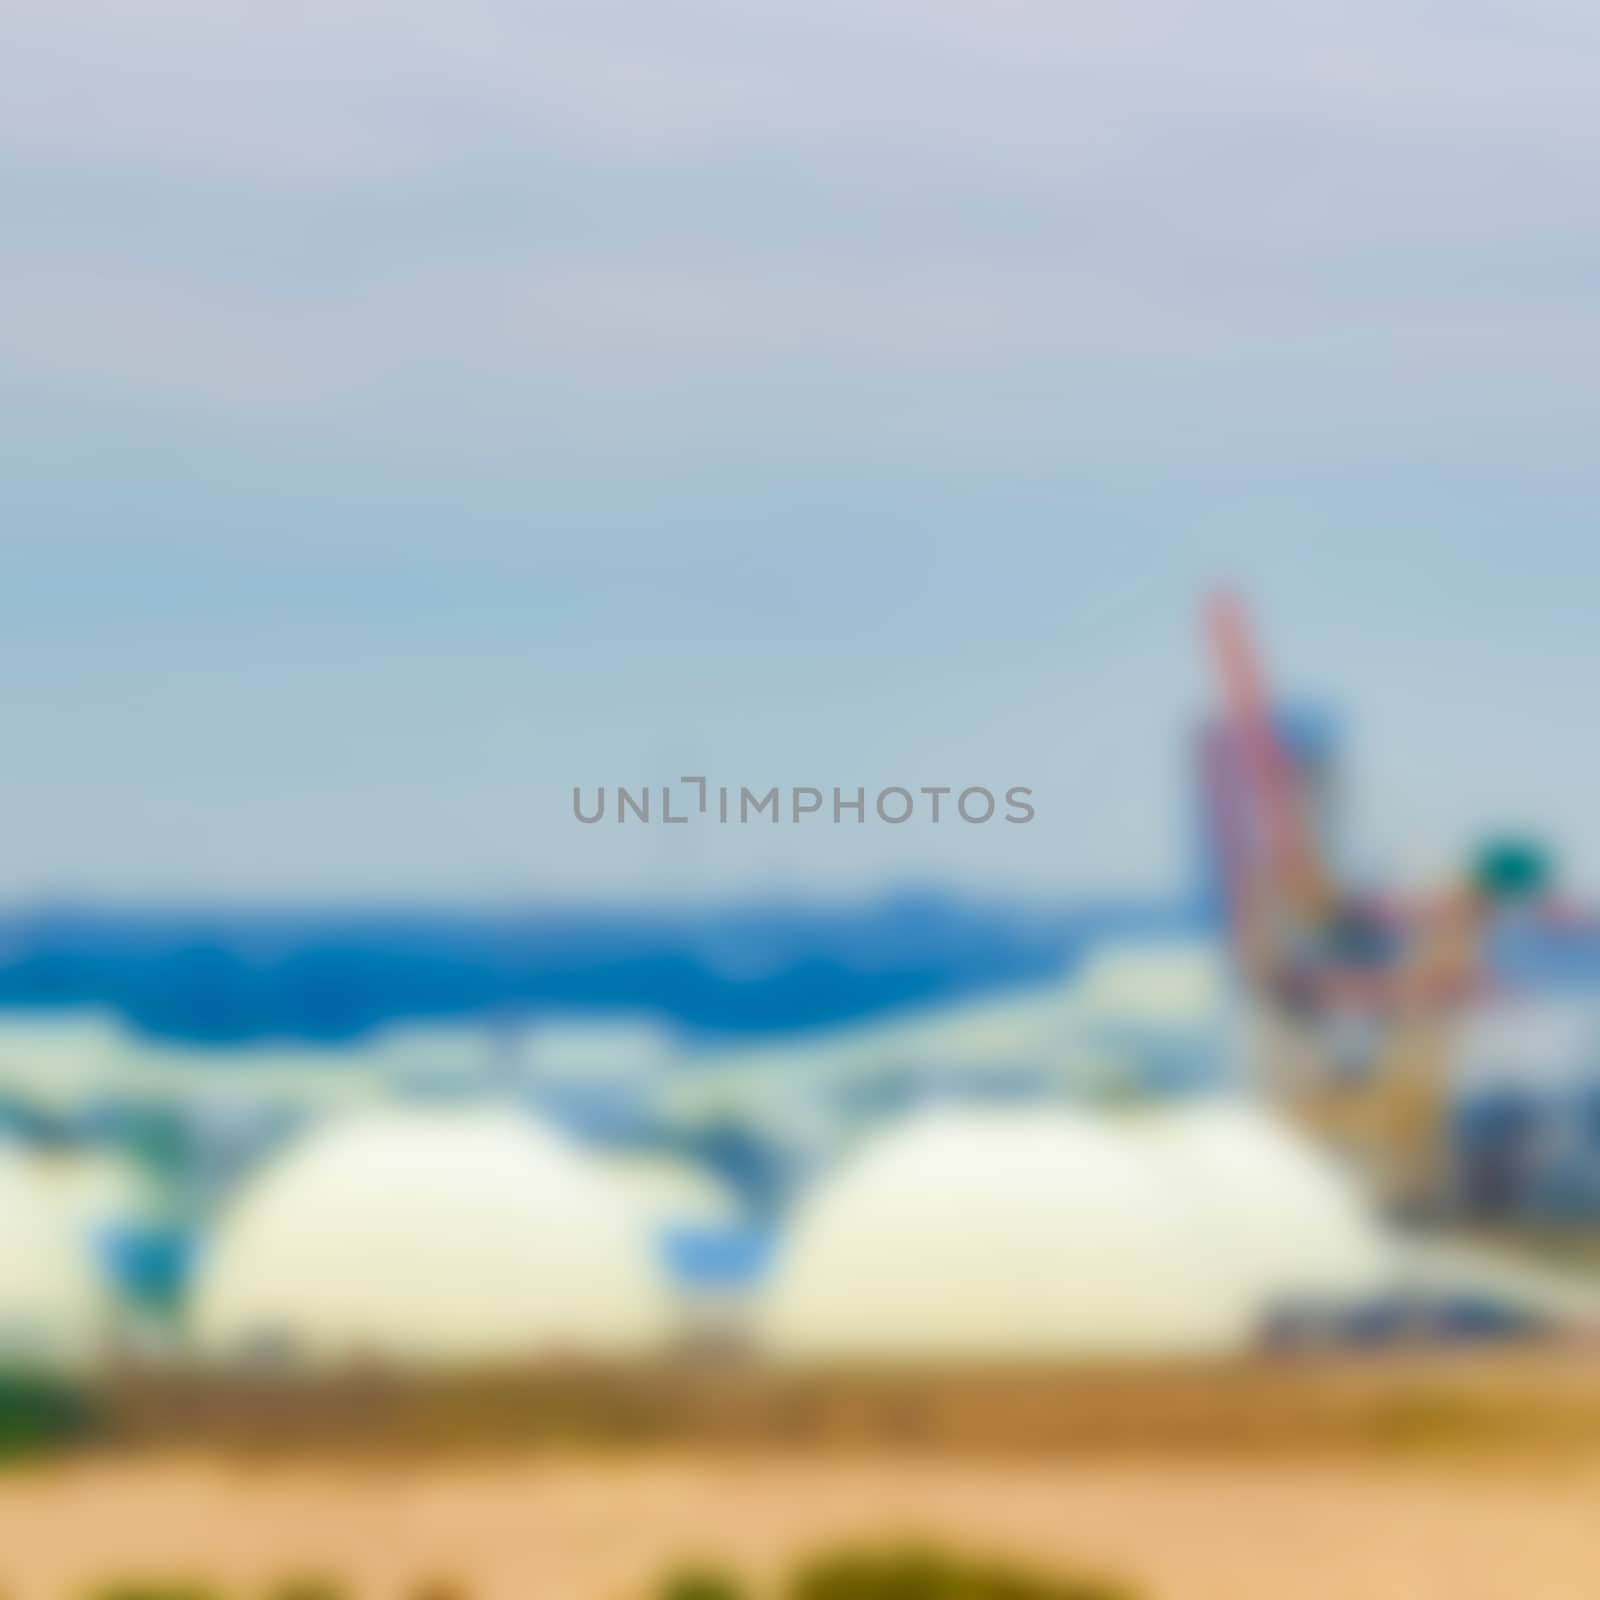 Cargo terminal - blurred image by sengnsp